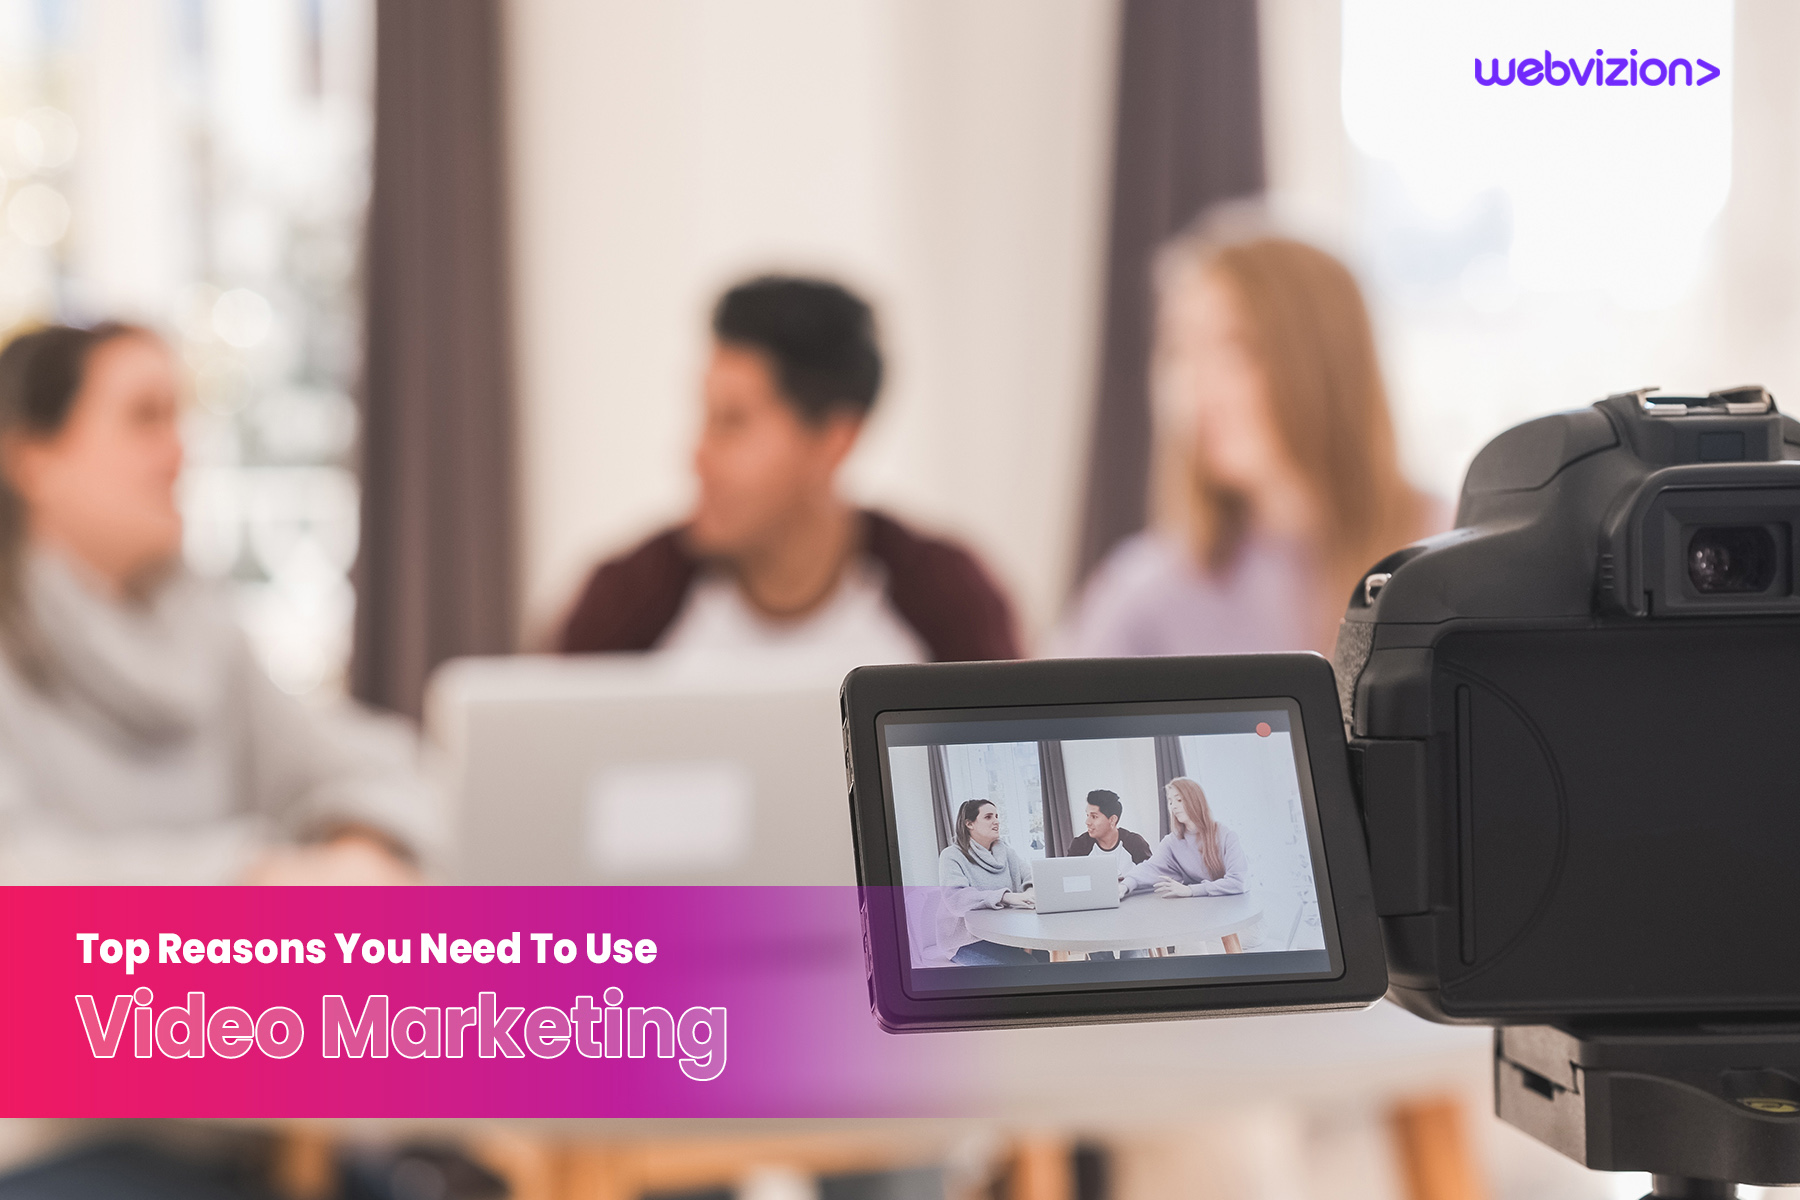 Top-Reasons-You-Need-To-Use-Video-Marketing-Webvizion-Global